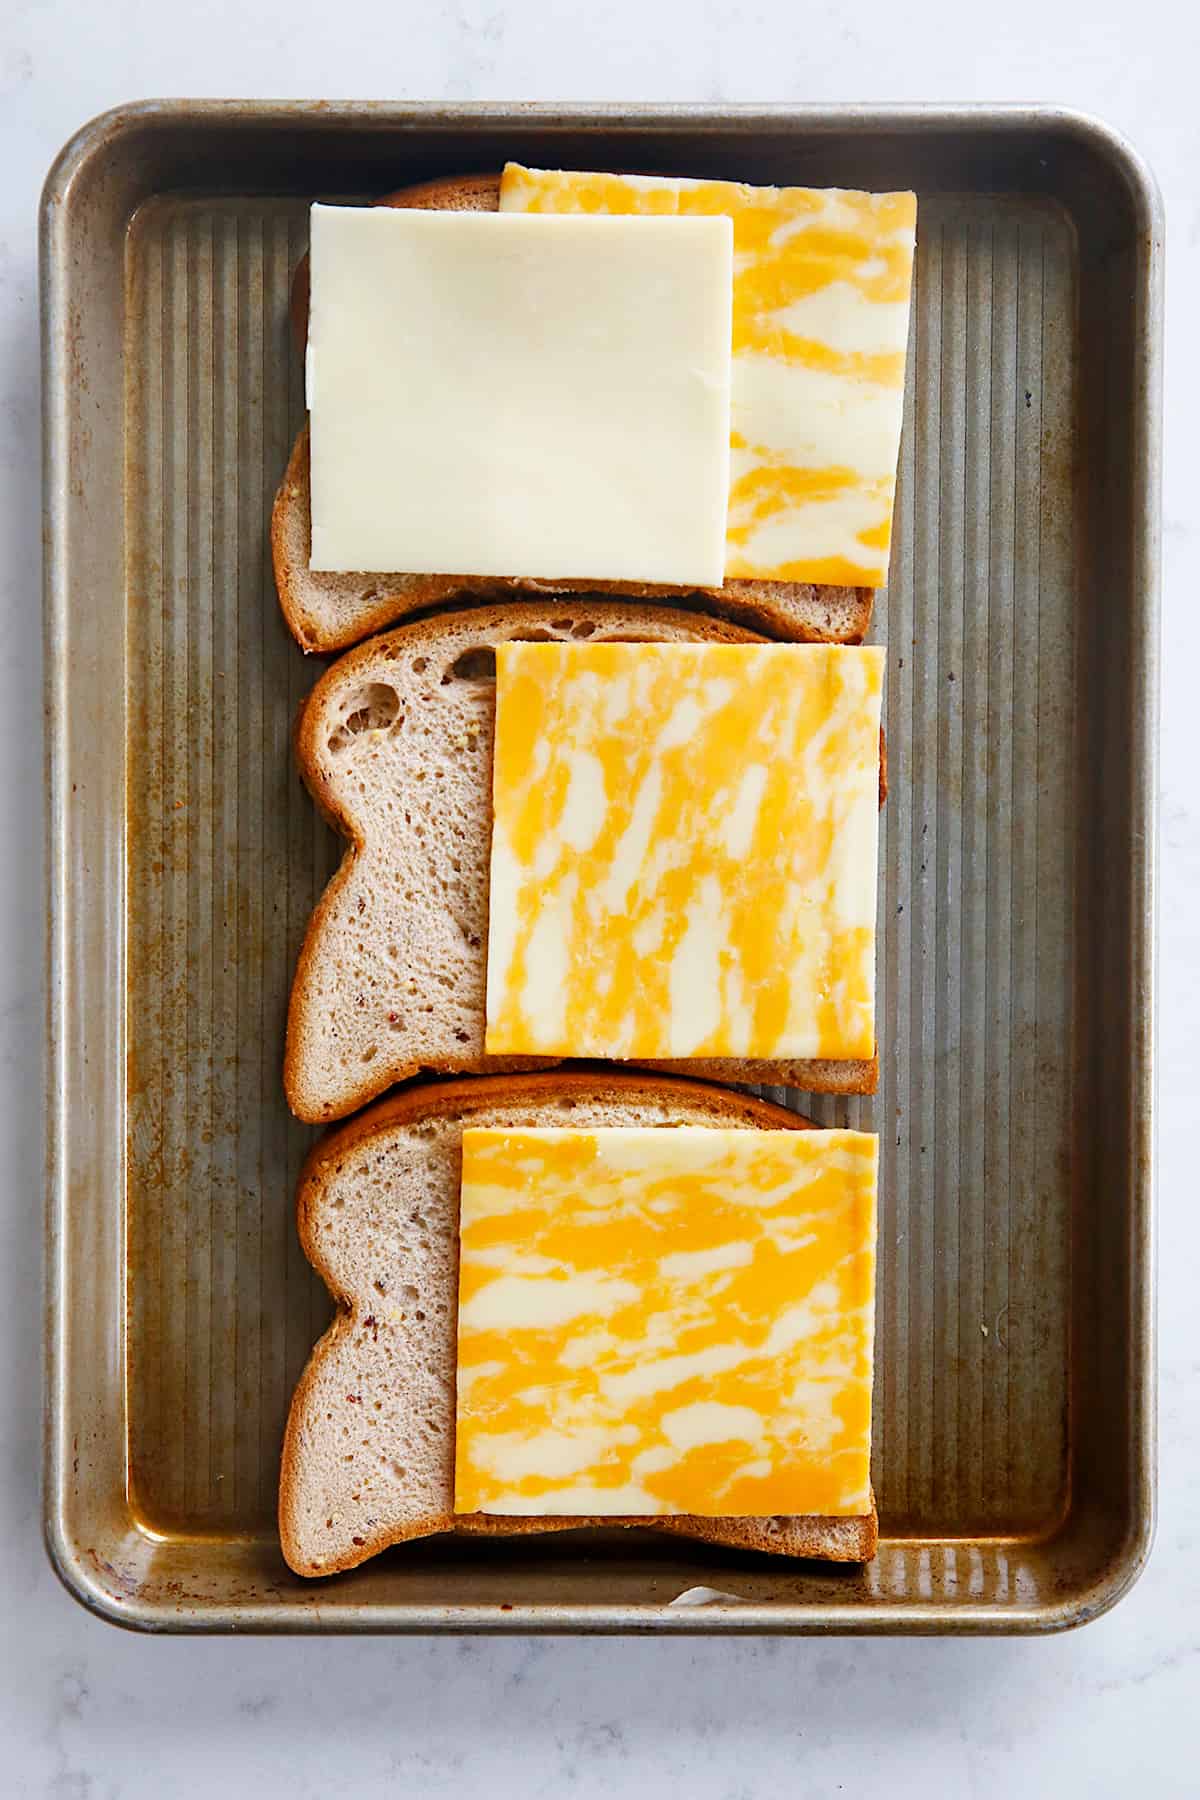 cheese being layered onto a sandwich.